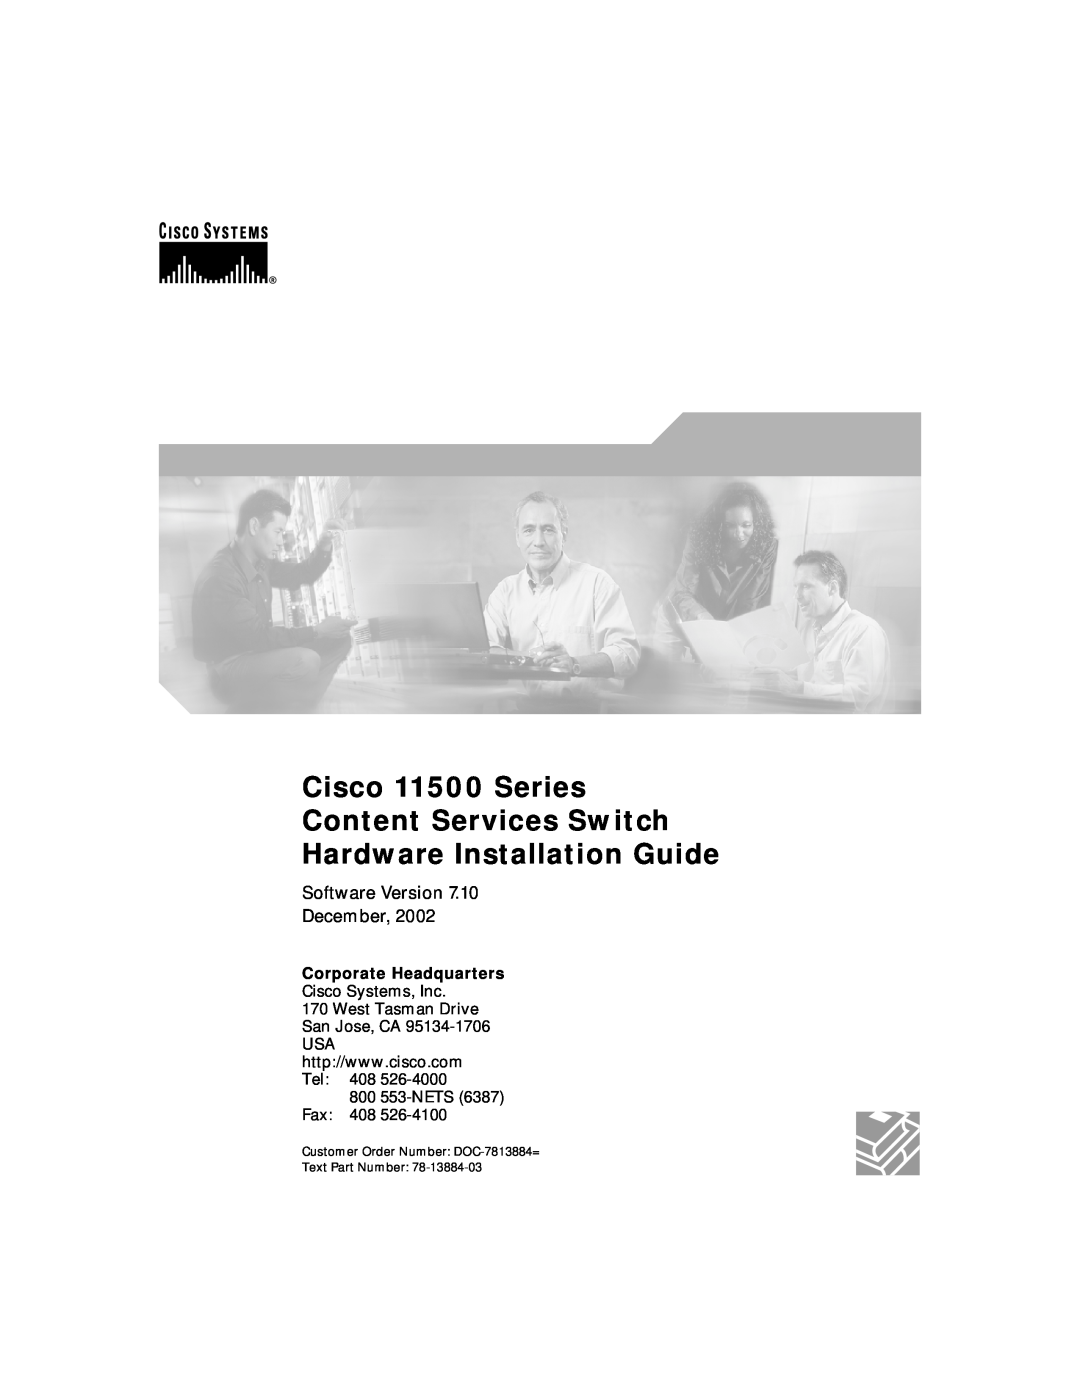 Cisco Systems manual Cisco 11500 Series Content Services Switch, Hardware Installation Guide, Software Version December 